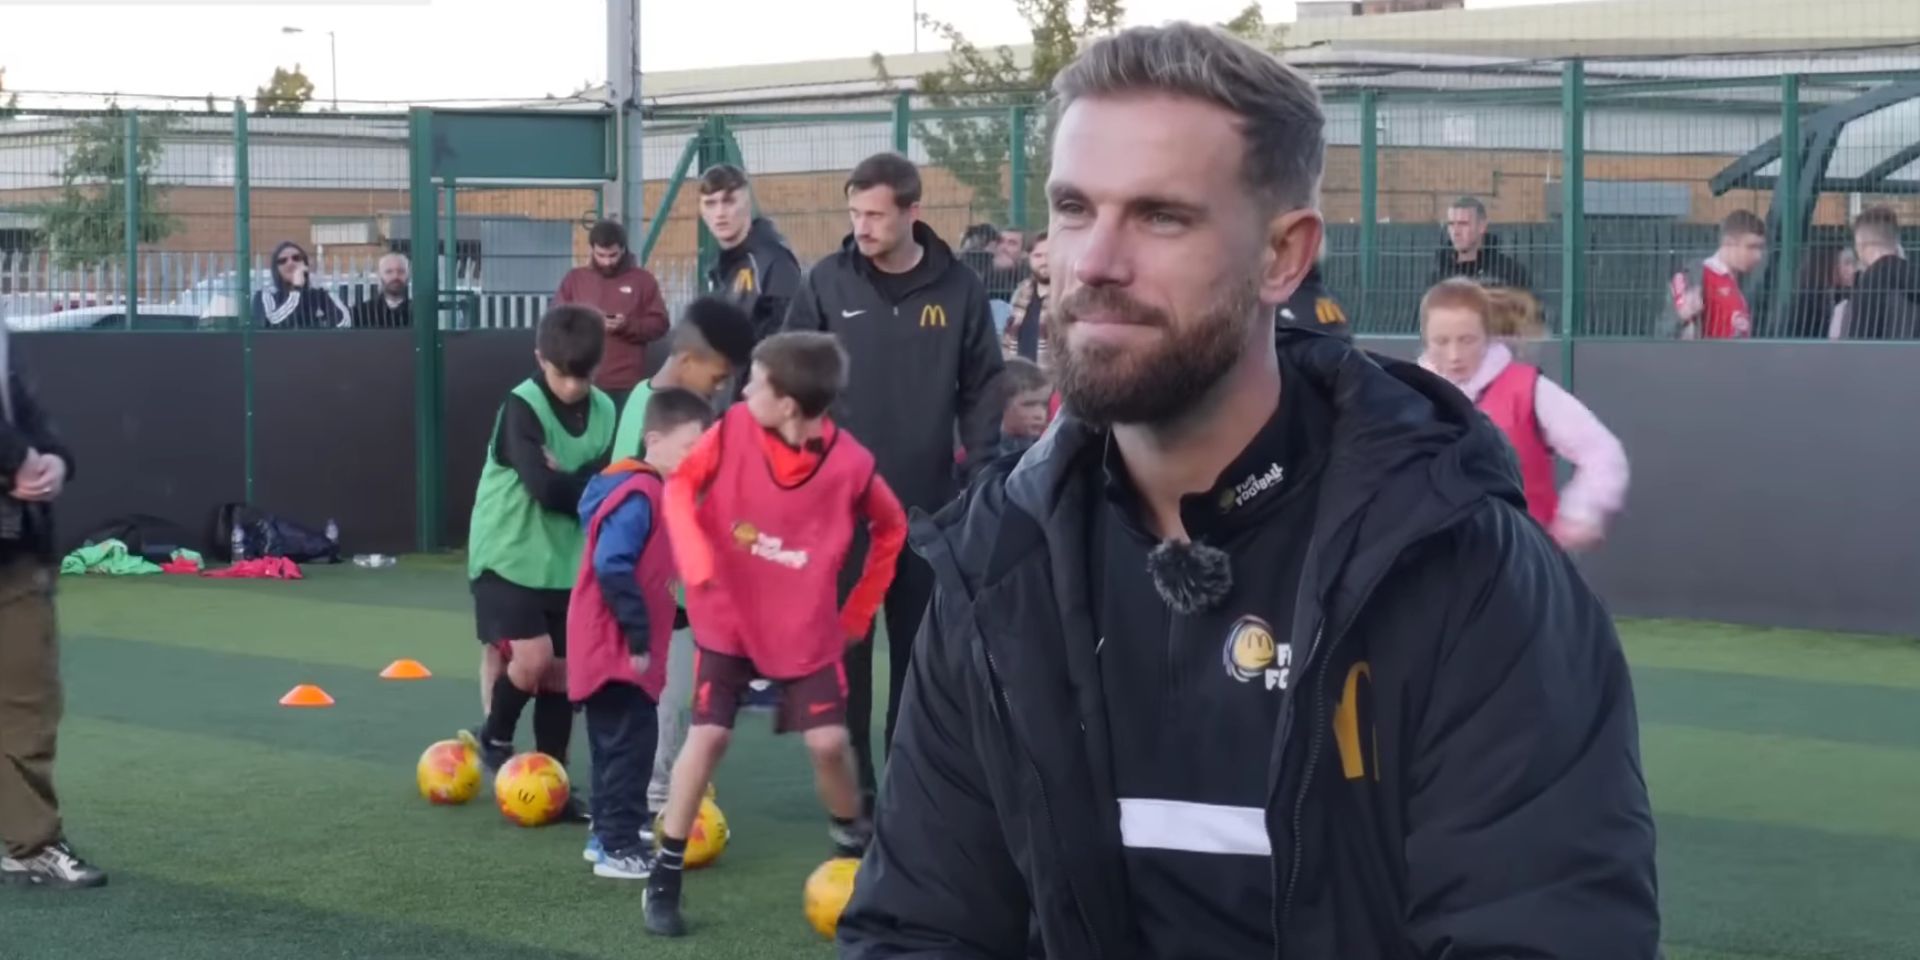 (Video) Henderson provides free football for kids and quizzed on Southgate, Klopp and pandemic fundraising